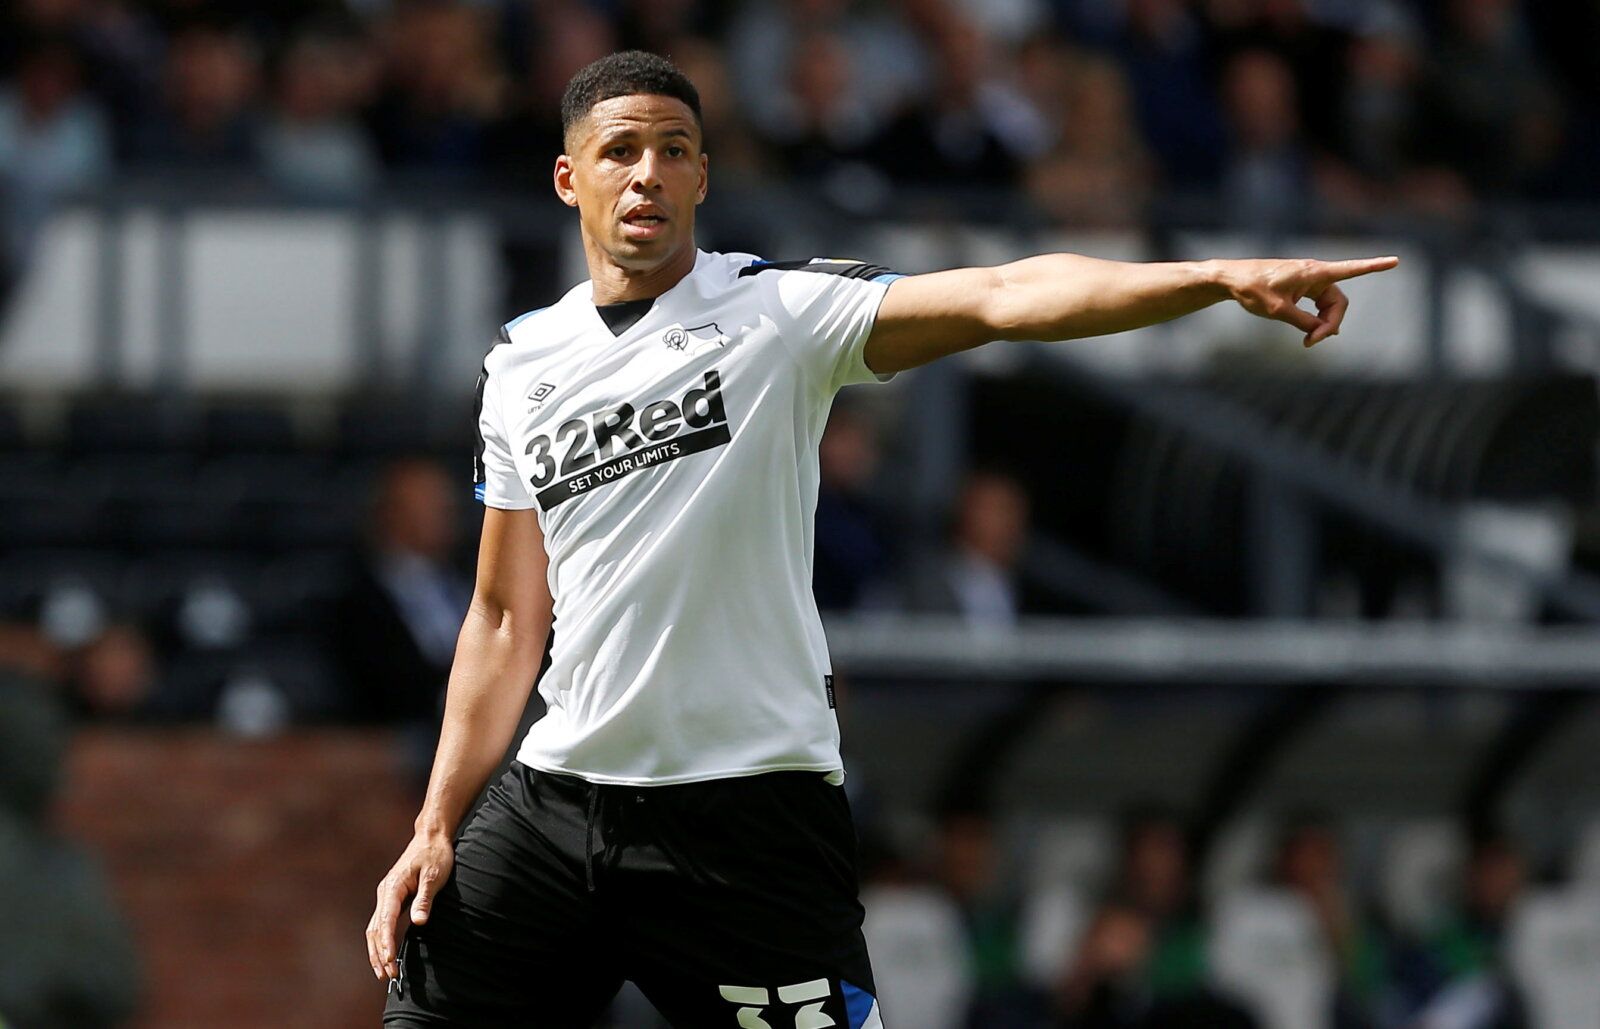 Soccer Football - Championship - Derby County v Nottingham Forest - Pride Park, Derby, Britain - August 28, 2021   Derby County's Curtis Davies    Action Images/Craig Brough    EDITORIAL USE ONLY. No use with unauthorized audio, video, data, fixture lists, club/league logos or "live" services. Online in-match use limited to 75 images, no video emulation. No use in betting, games or single club/league/player publications.  Please contact your account representative for further details.